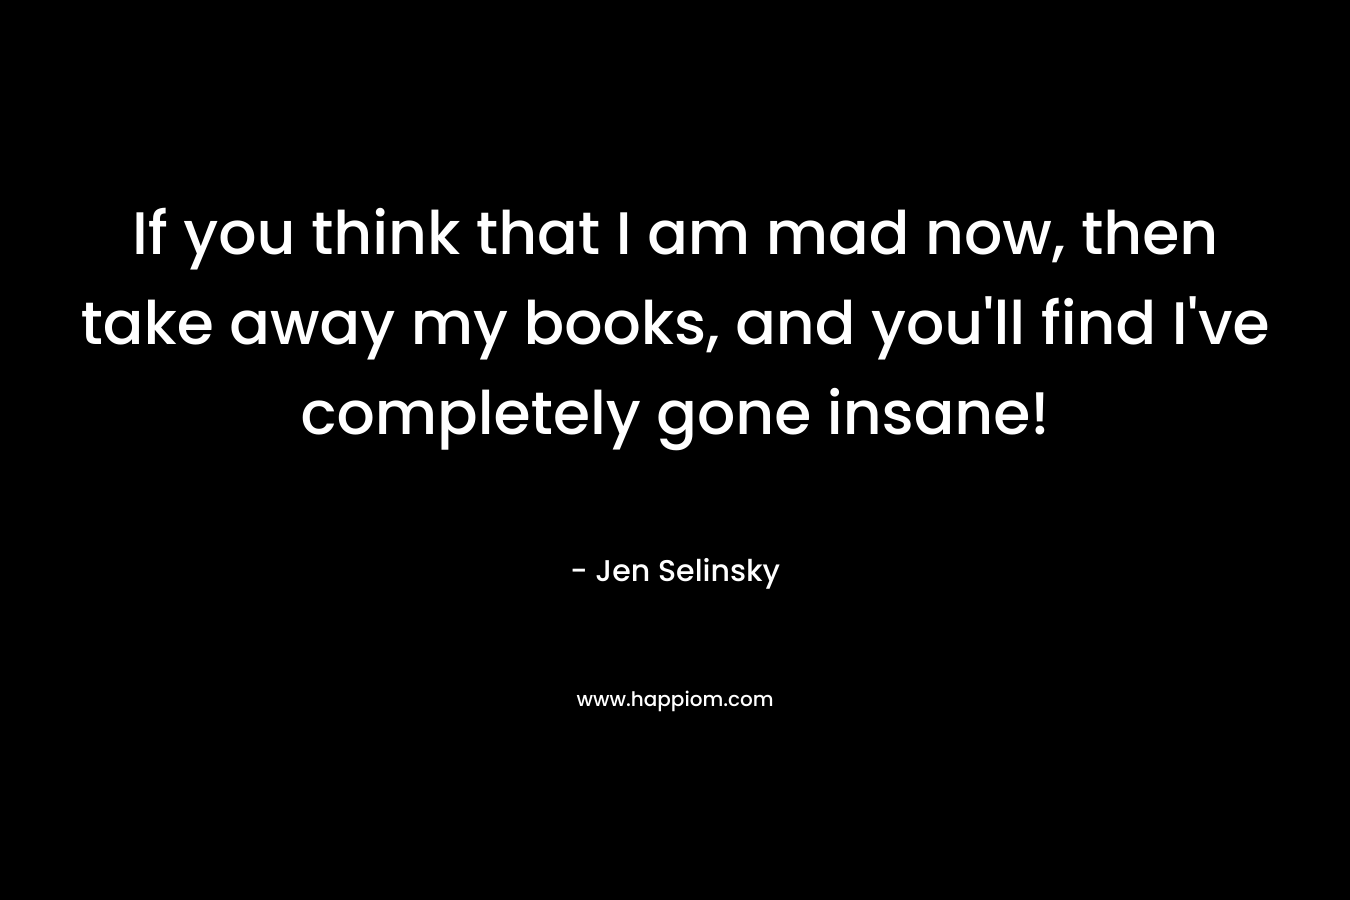 If you think that I am mad now, then take away my books, and you’ll find I’ve completely gone insane! – Jen Selinsky